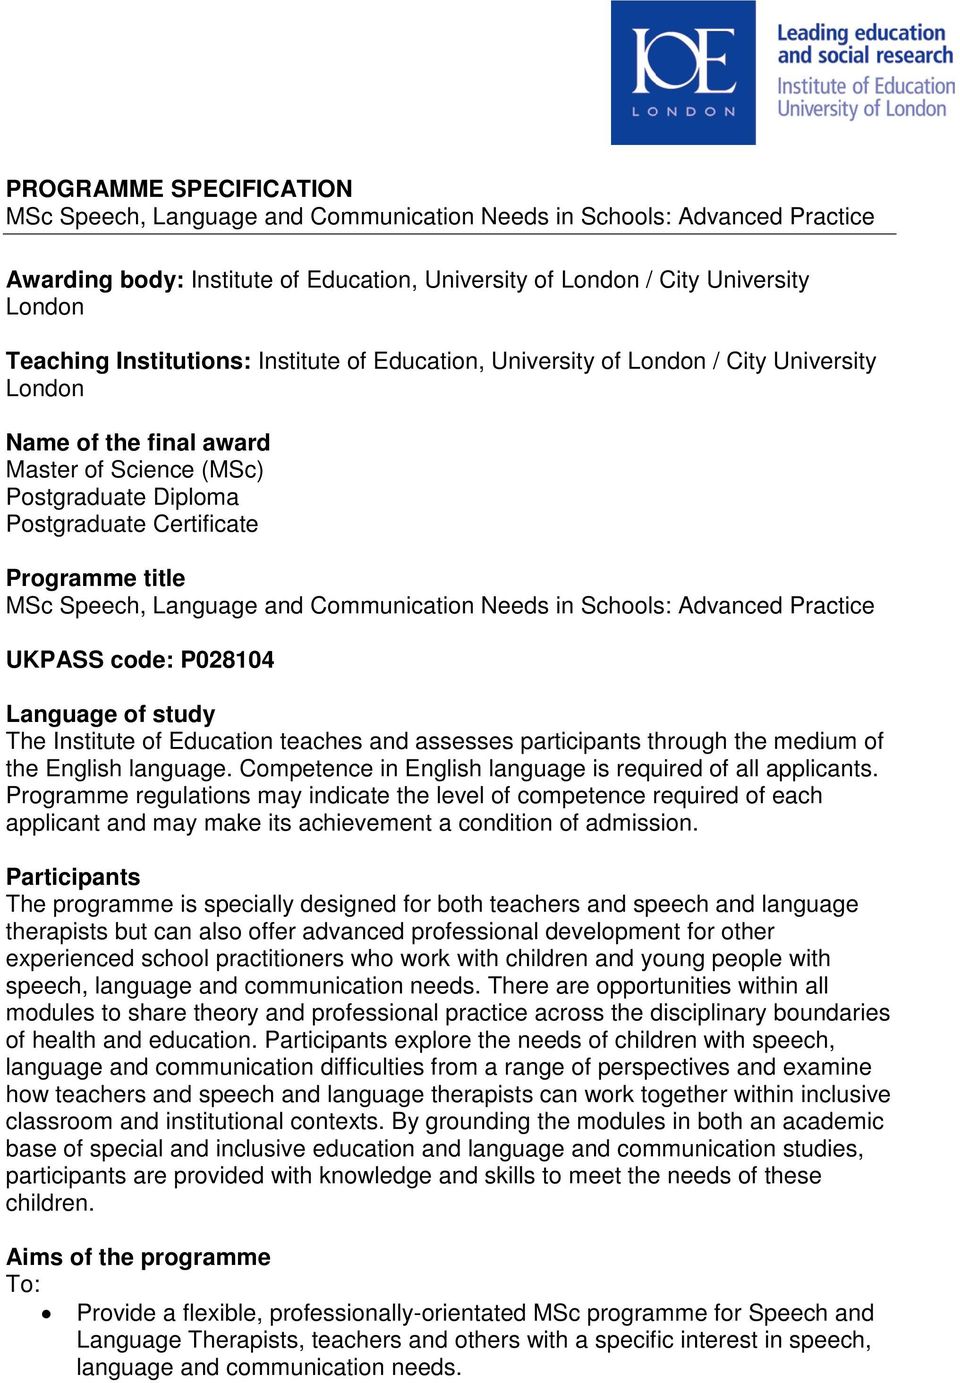 Speech, Language and Communication Needs in Schools: Advanced Practice UKPASS code: P028104 Language of study The Institute of Education teaches and assesses participants through the medium of the